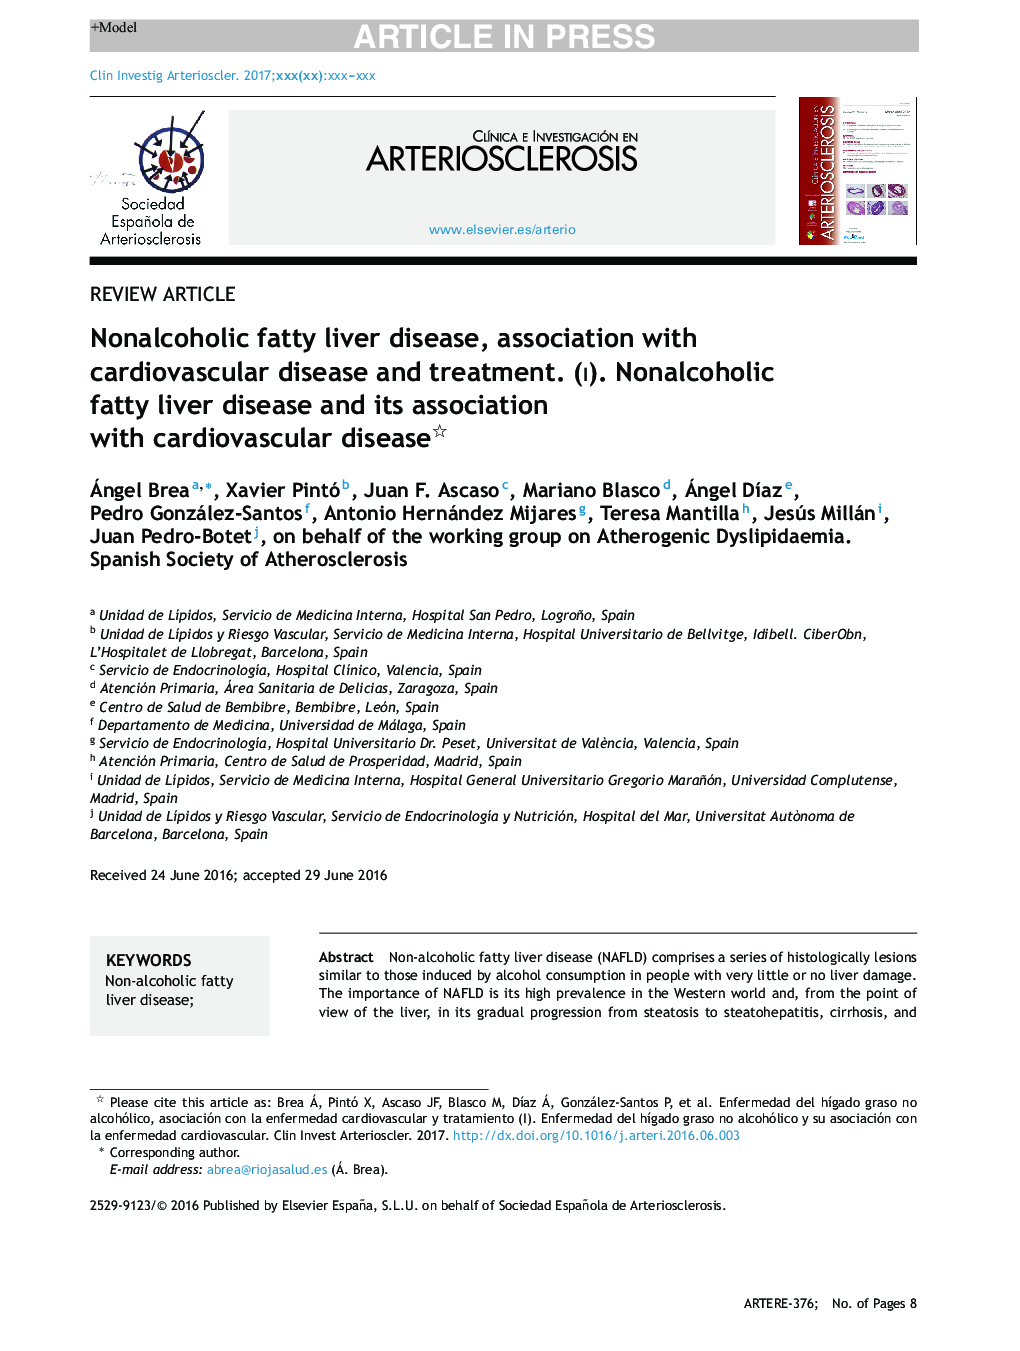 Nonalcoholic fatty liver disease, association with cardiovascular disease and treatment. (i). Nonalcoholic fatty liver disease and its association with cardiovascular disease